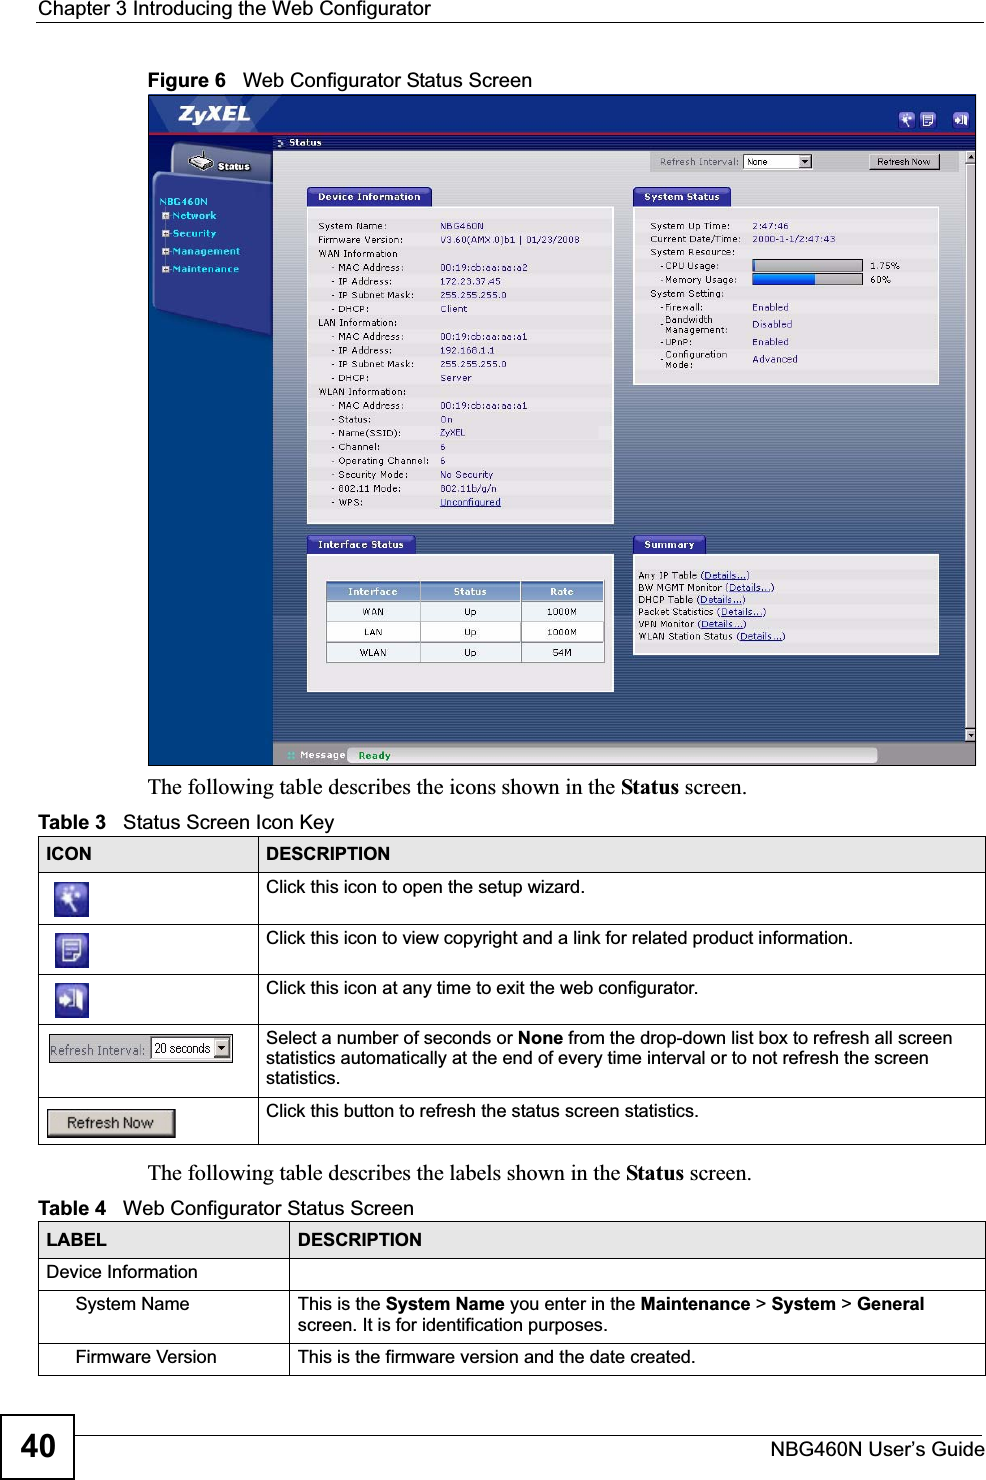 Chapter 3 Introducing the Web ConfiguratorNBG460N User’s Guide40Figure 6   Web Configurator Status Screen The following table describes the icons shown in the Status screen.The following table describes the labels shown in the Status screen.Table 3   Status Screen Icon Key ICON DESCRIPTIONClick this icon to open the setup wizard. Click this icon to view copyright and a link for related product information.Click this icon at any time to exit the web configurator.Select a number of seconds or None from the drop-down list box to refresh all screen statistics automatically at the end of every time interval or to not refresh the screen statistics.Click this button to refresh the status screen statistics.Table 4   Web Configurator Status Screen   LABEL DESCRIPTIONDevice InformationSystem Name This is the System Name you enter in the Maintenance &gt; System &gt; Generalscreen. It is for identification purposes.Firmware Version This is the firmware version and the date created. 